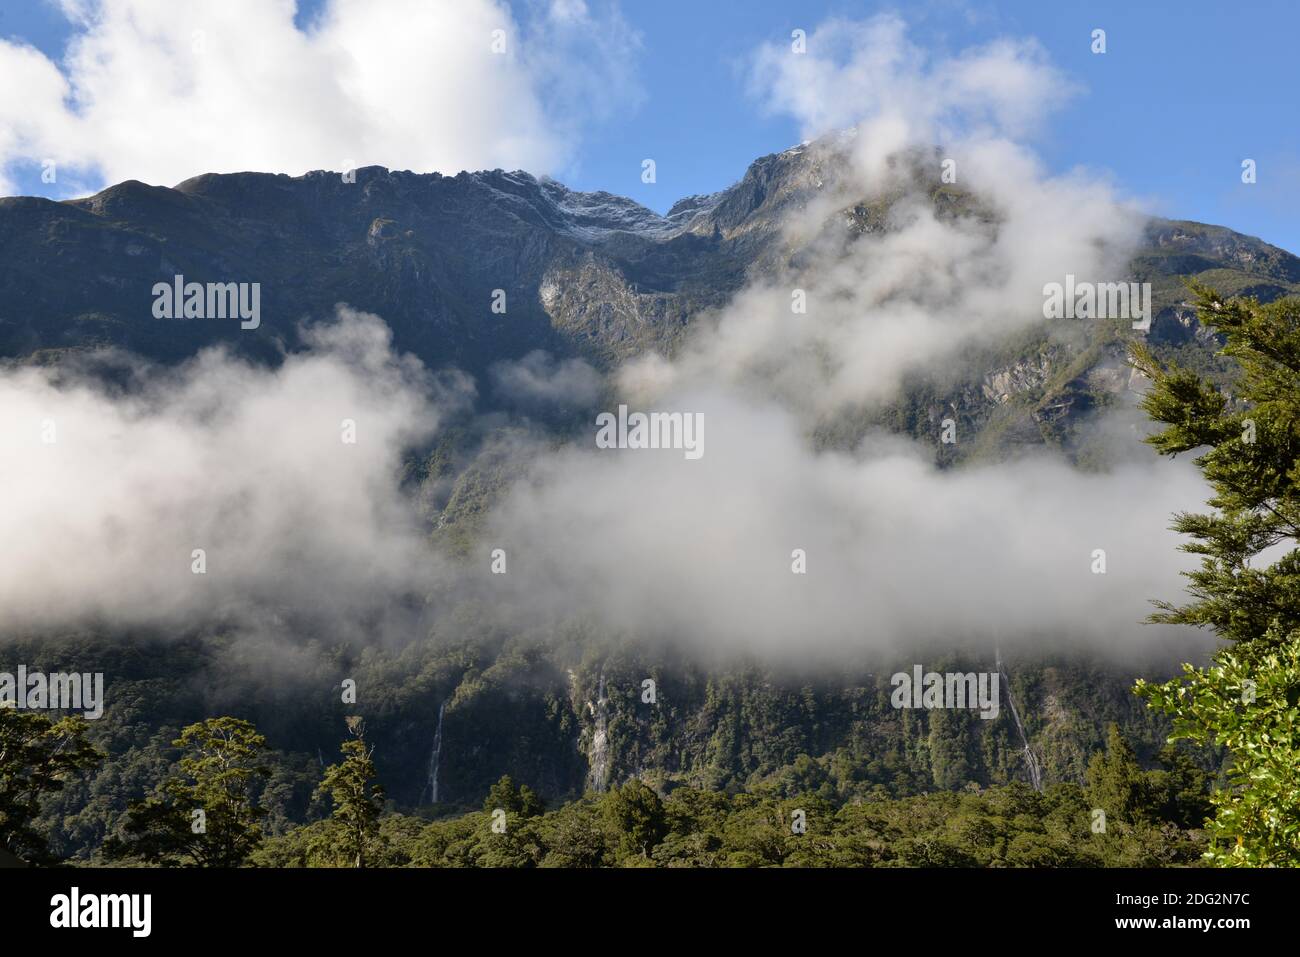 Walls of Milford Sound Fjord Foto Stock